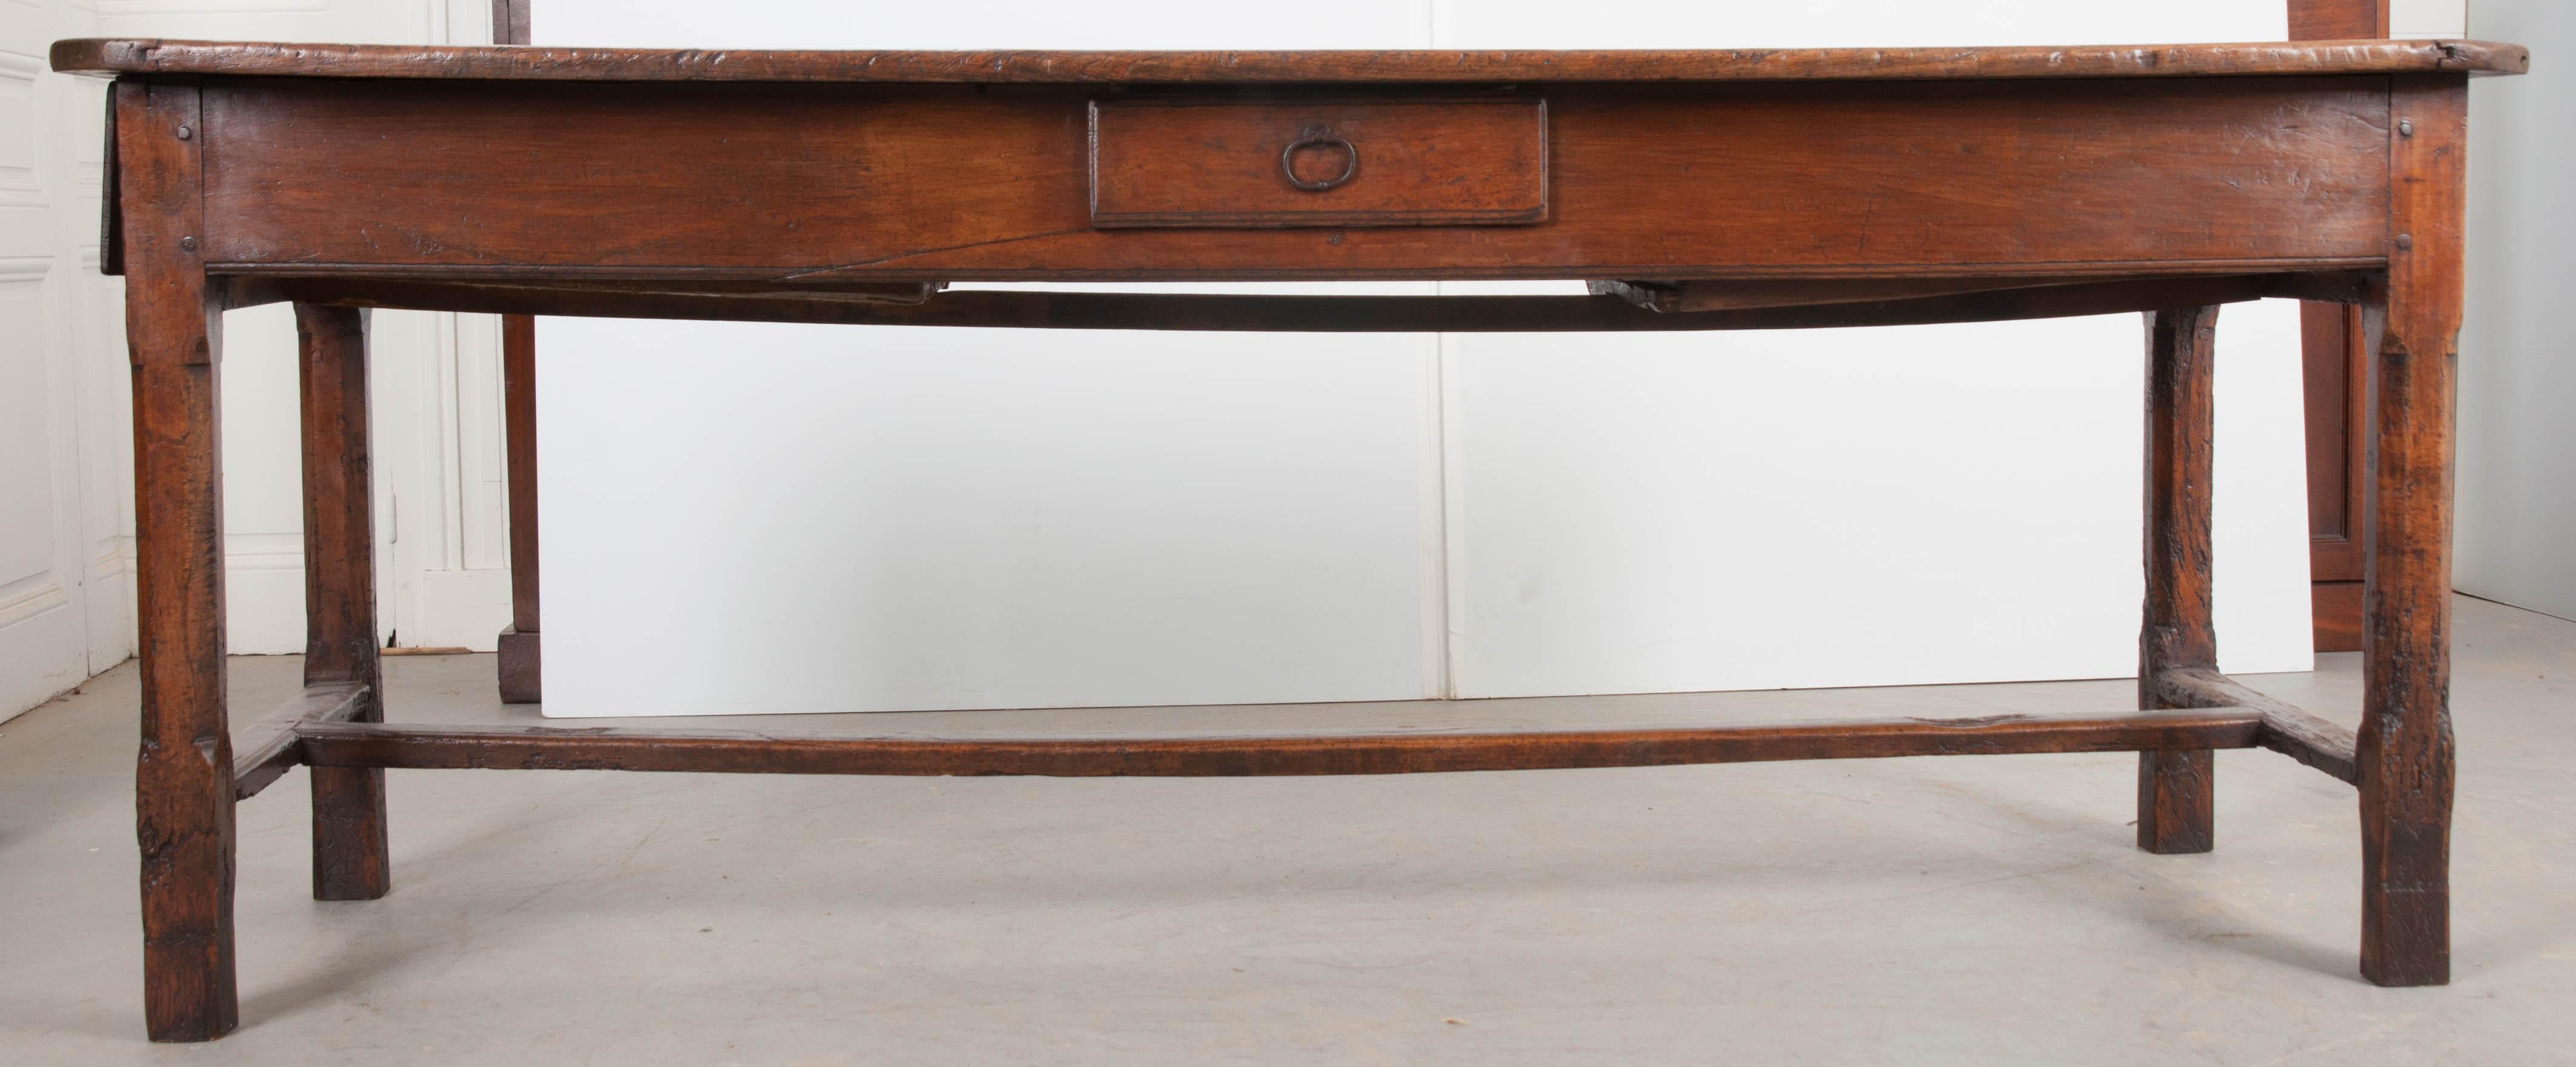 French Provincial French 19th Century Walnut Farmhouse Table